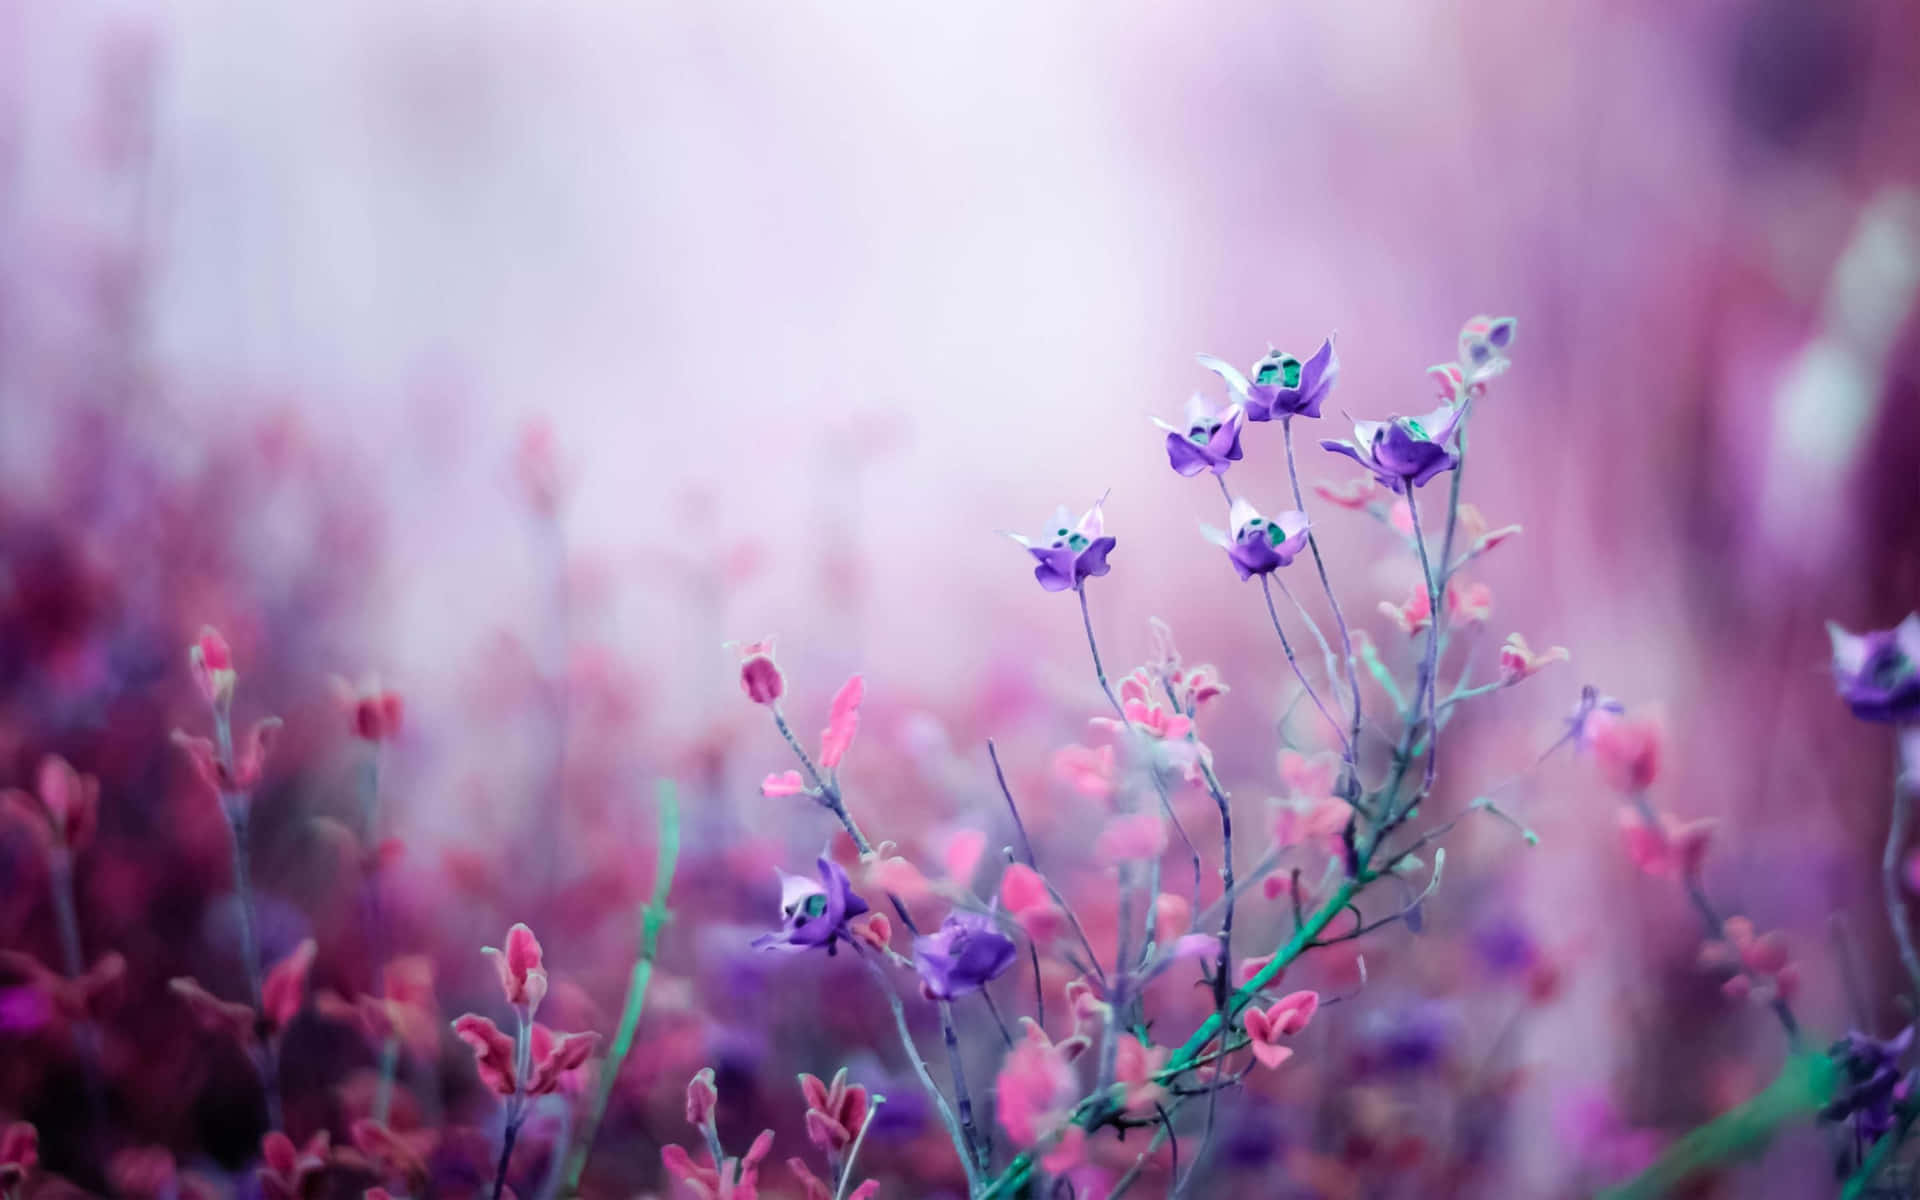 A purple flower in the middle of some pink flowers - 1920x1200, spring